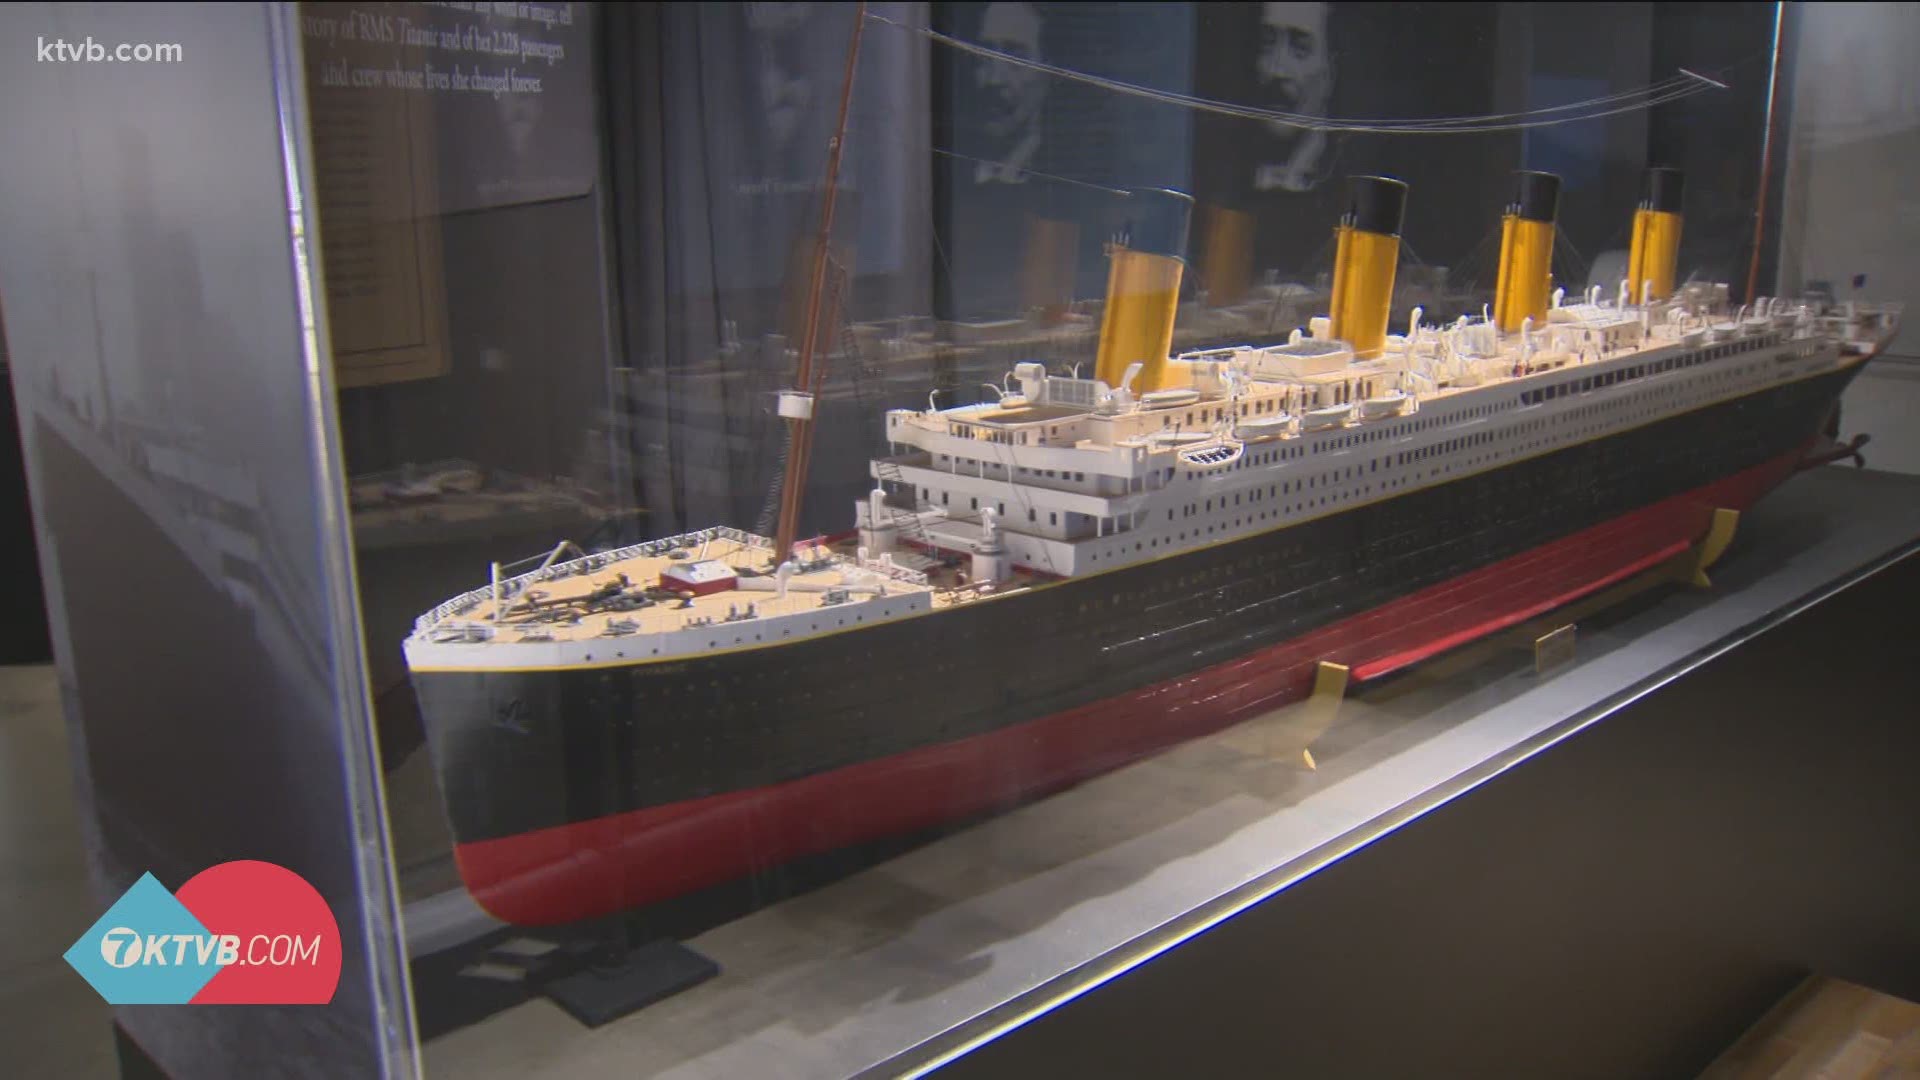 More than 100 artifacts from the actual ship have made their way to Idaho and are on exhibit in Boise.